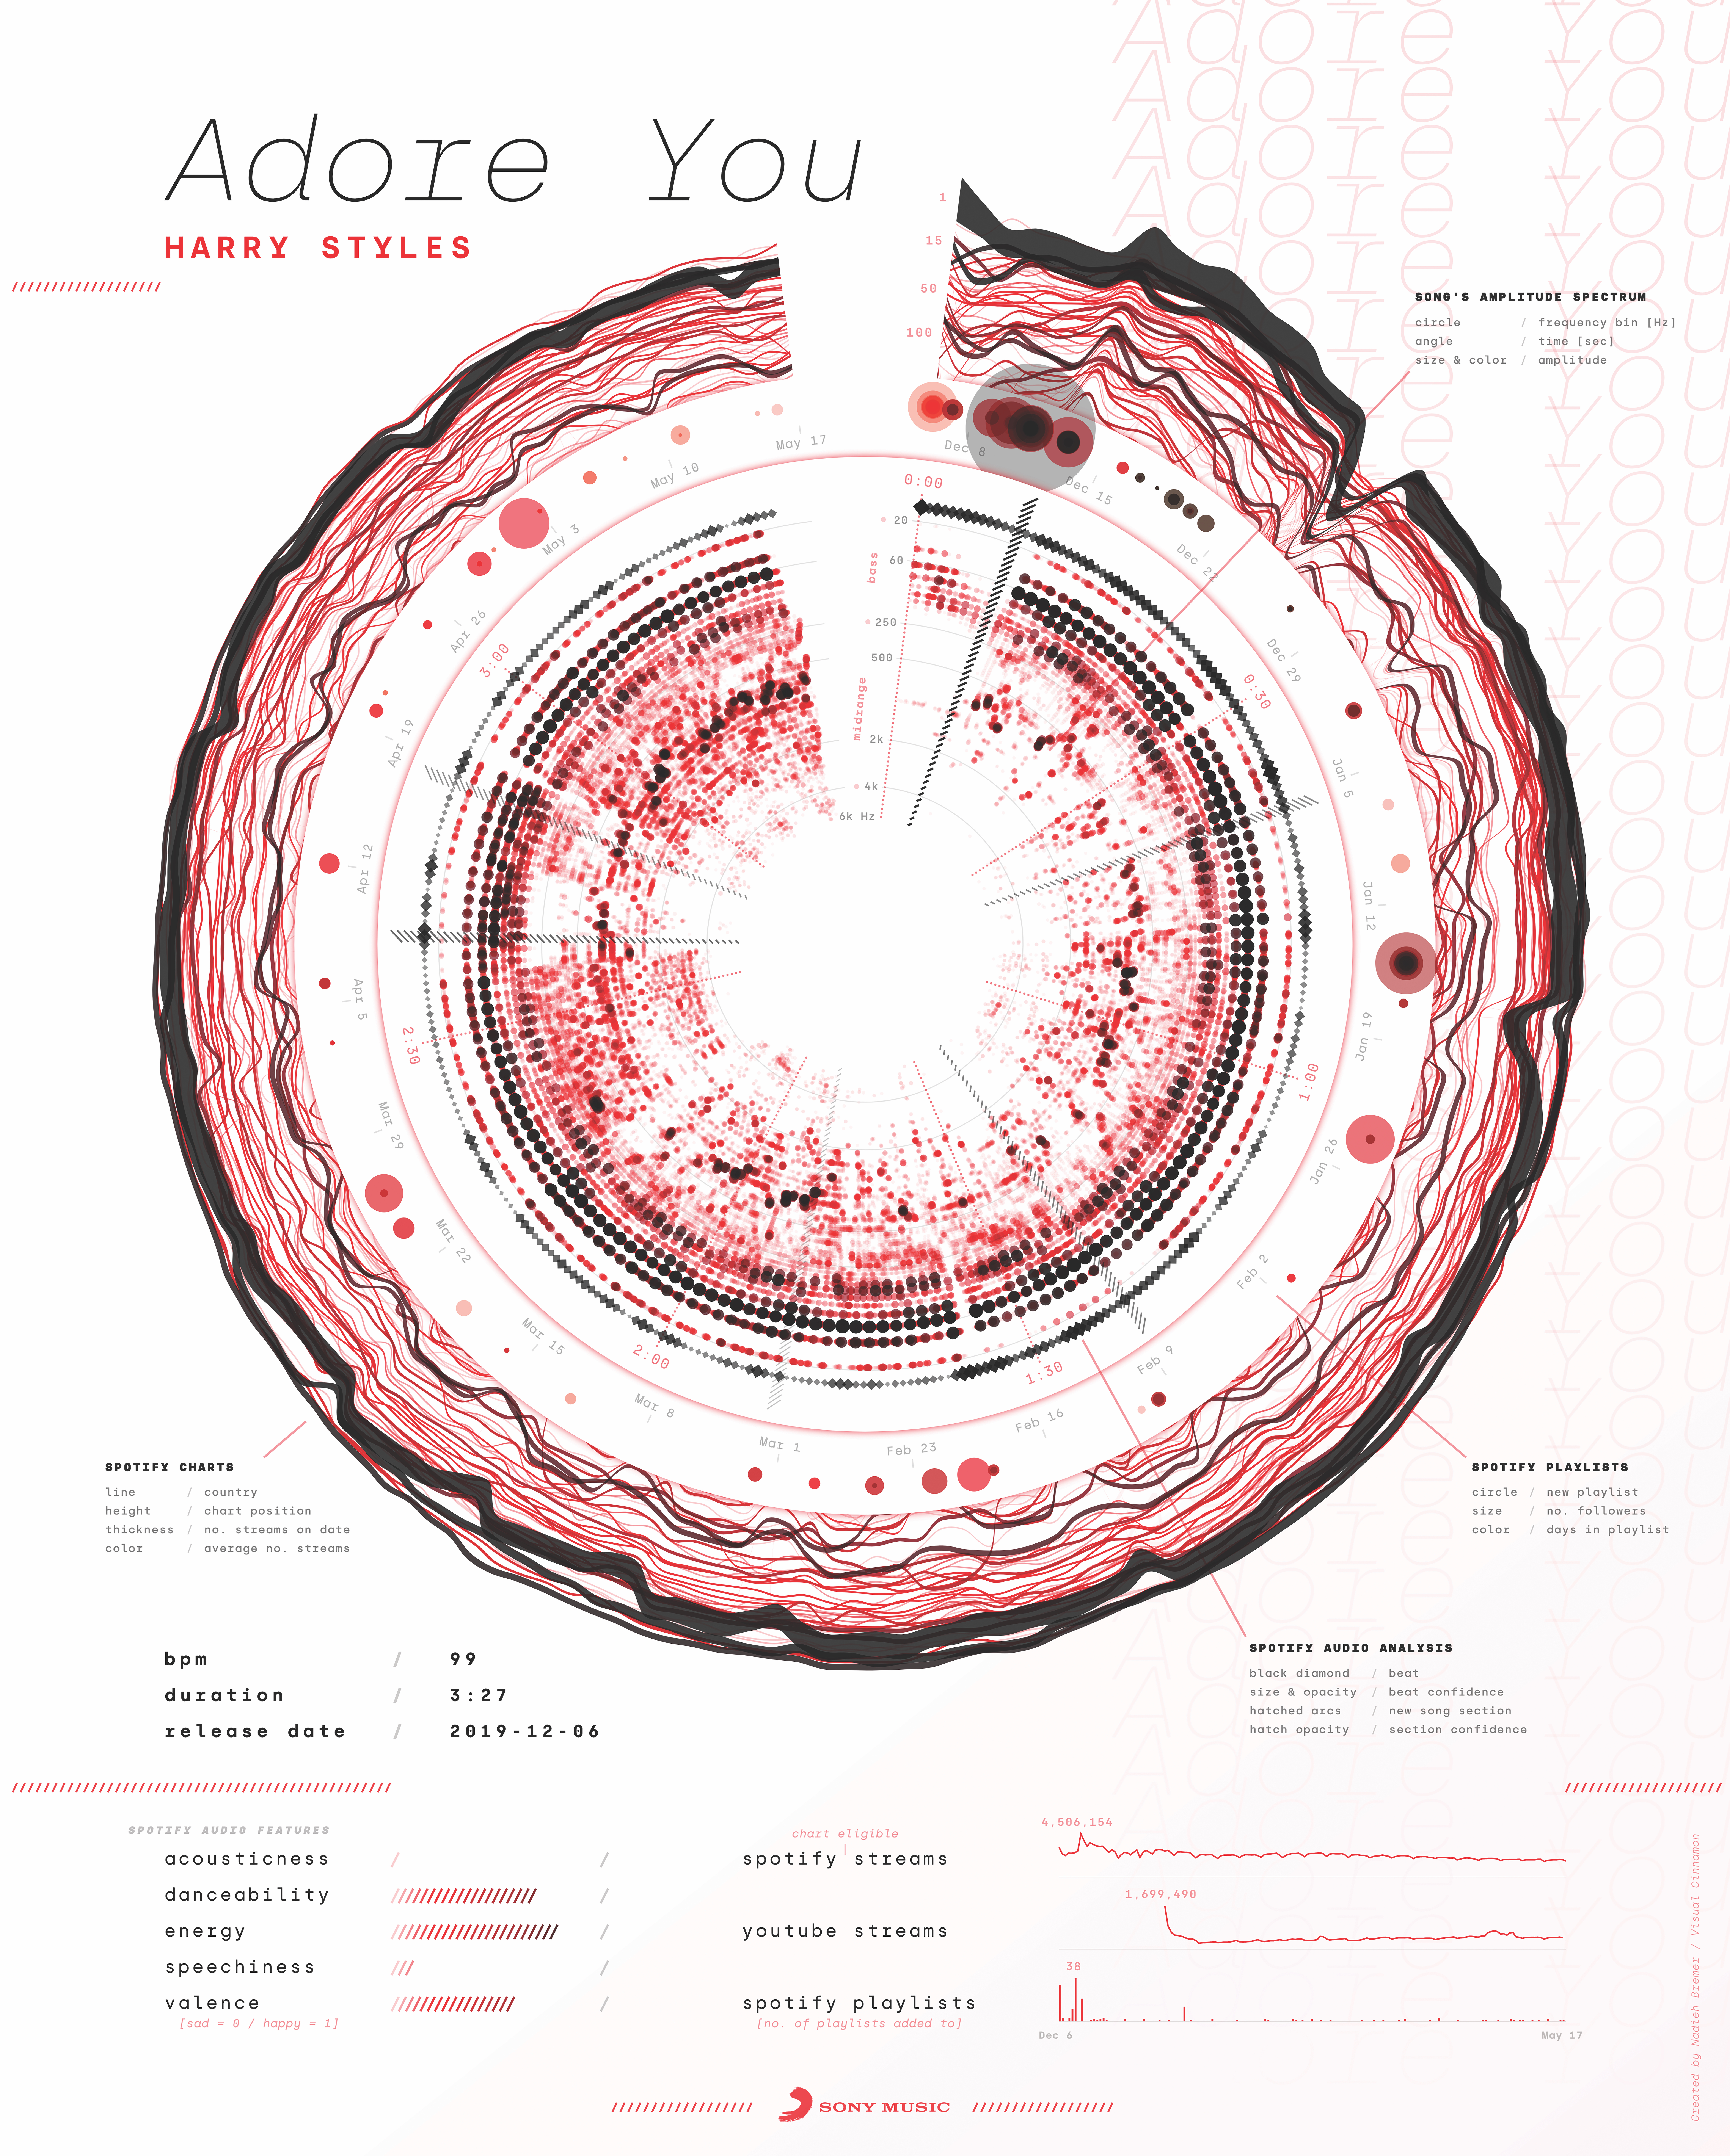 Visualization of Harry Styles’s song “Adore You”. The overall visualization is red and circular, like a record, showing details about chart performance and musical properties of the sound. As you move clockwise, you progress through time (of song and after release).